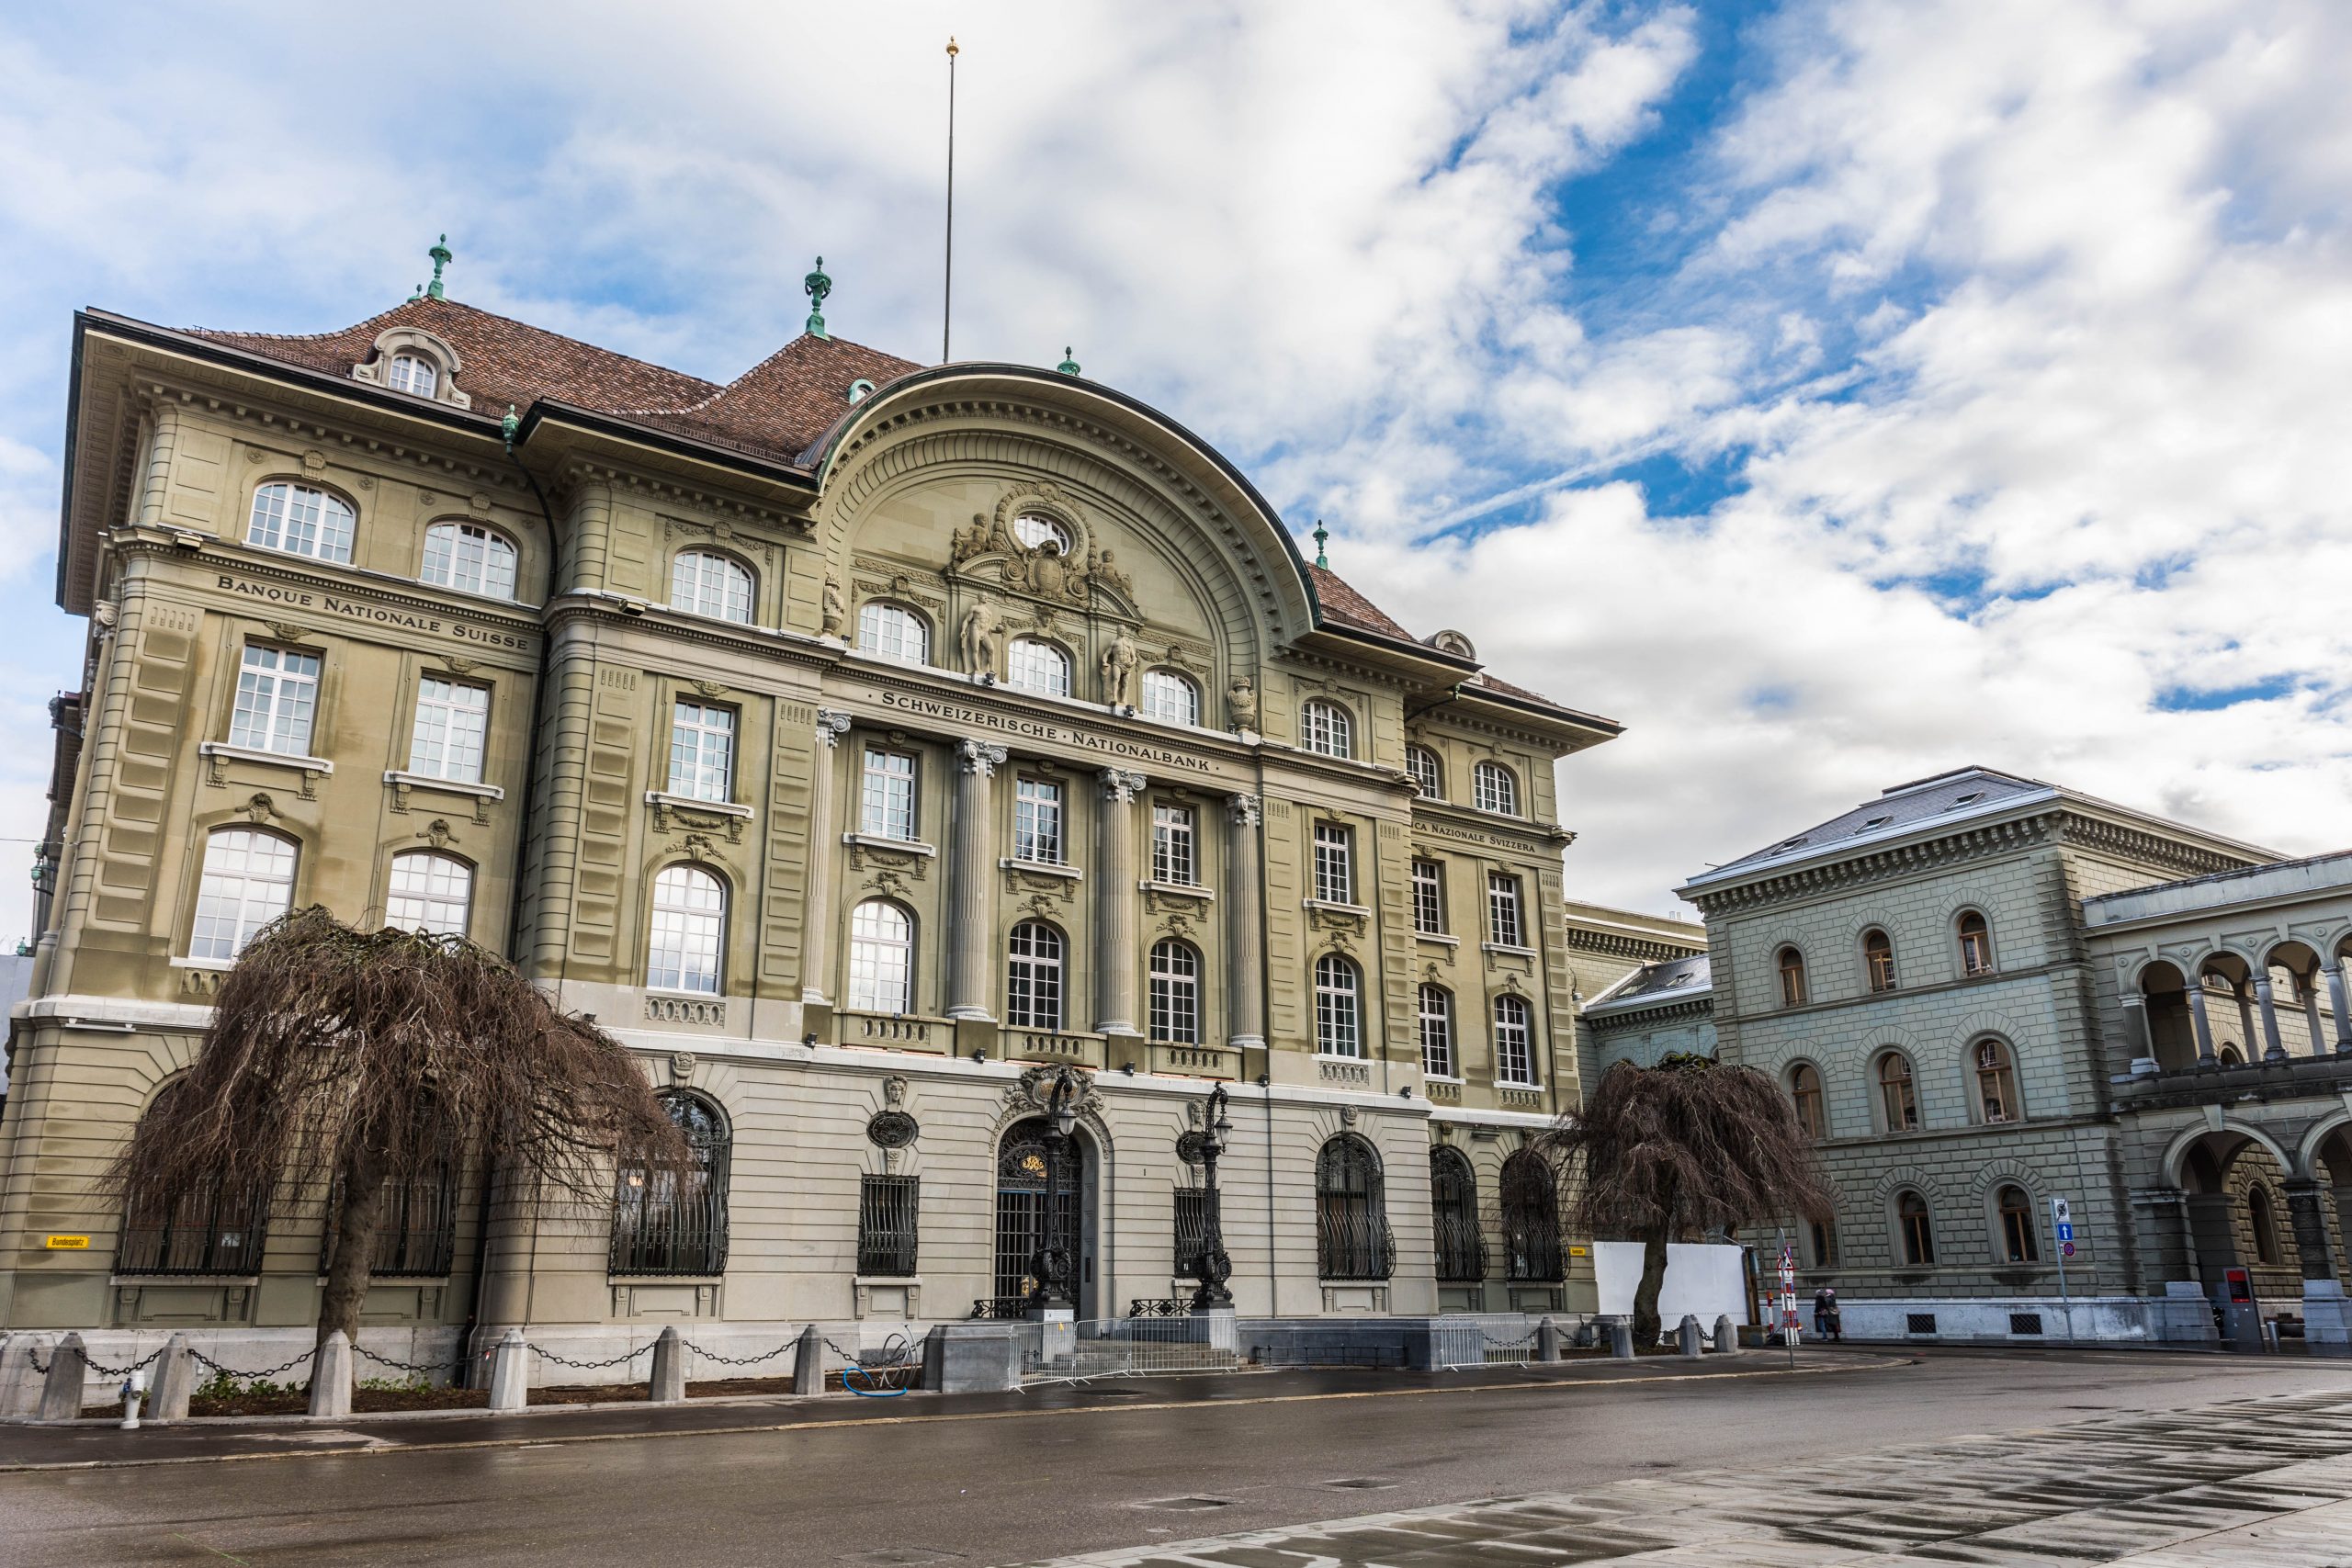 Romeo Lacher and Christoph Mäder nominated for election to the SNB Bank Council